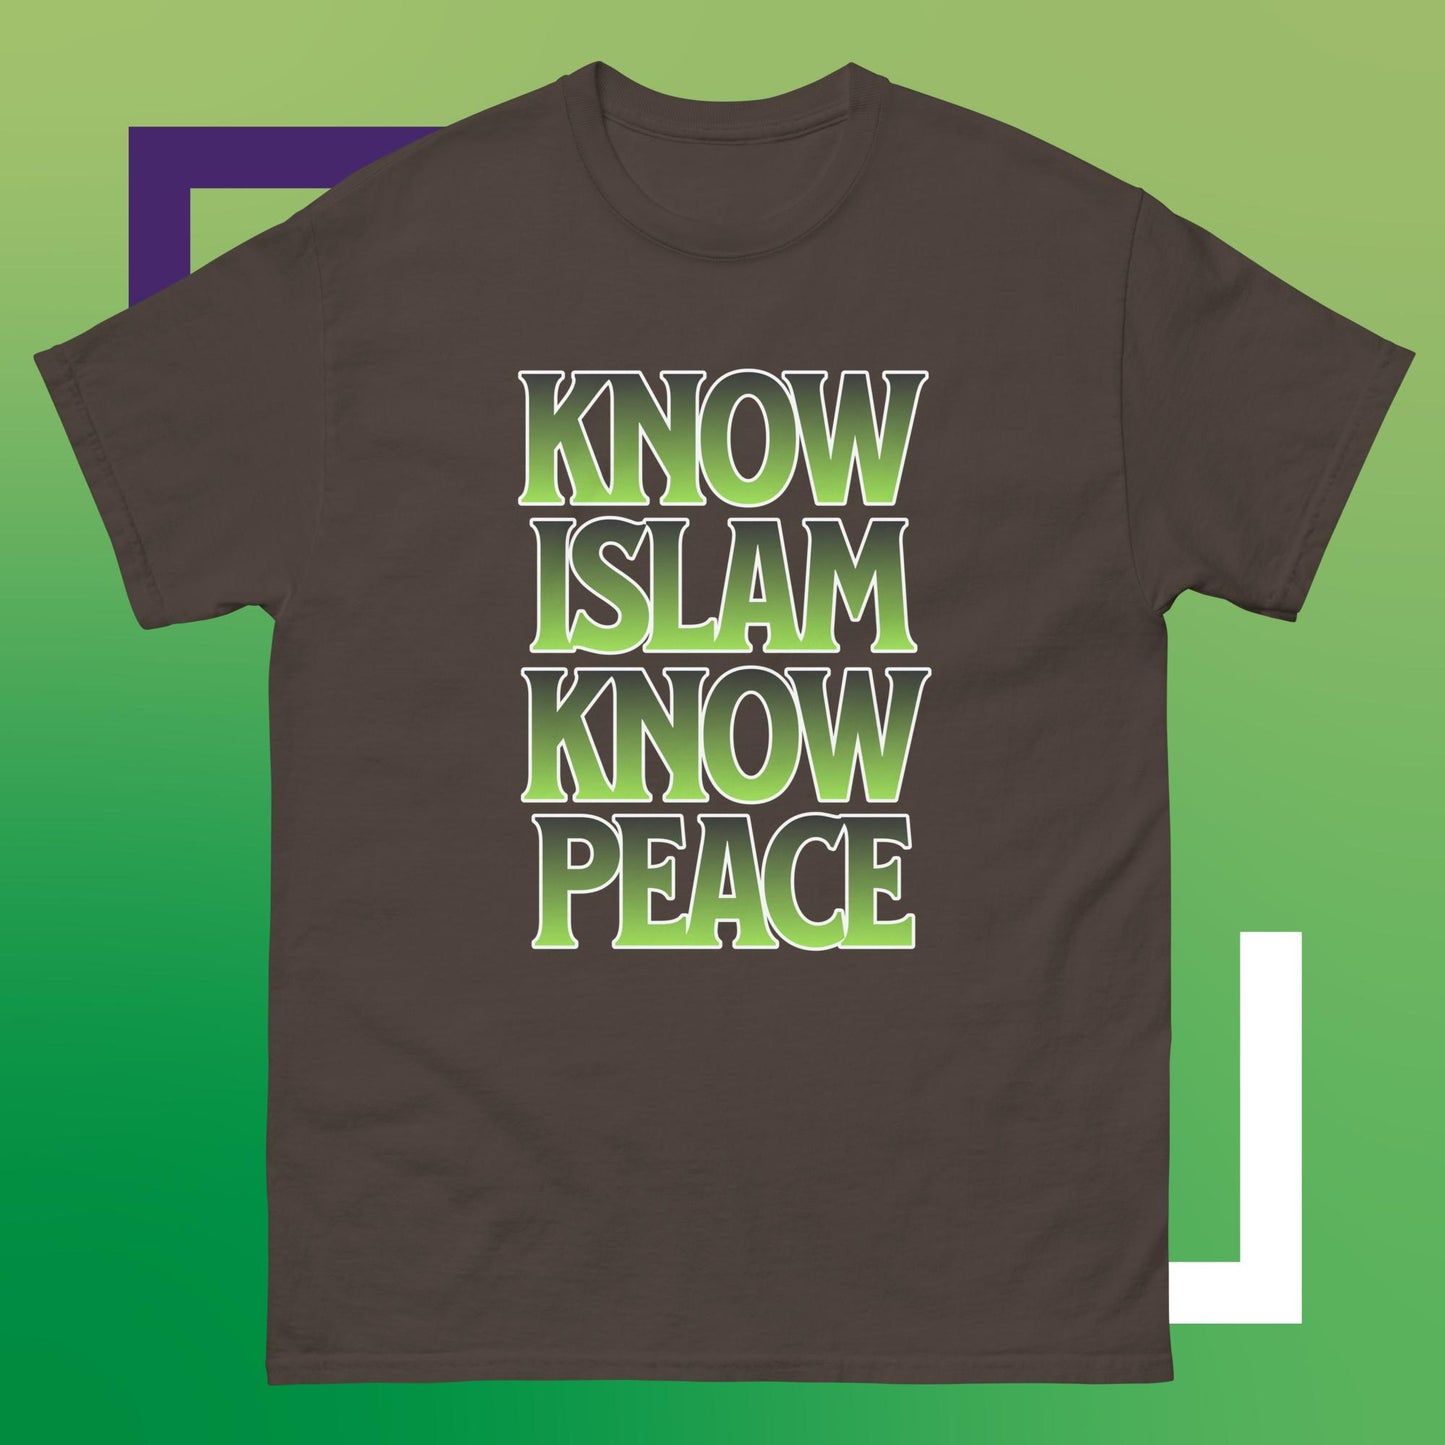 Know islam know peace Men's classic tee